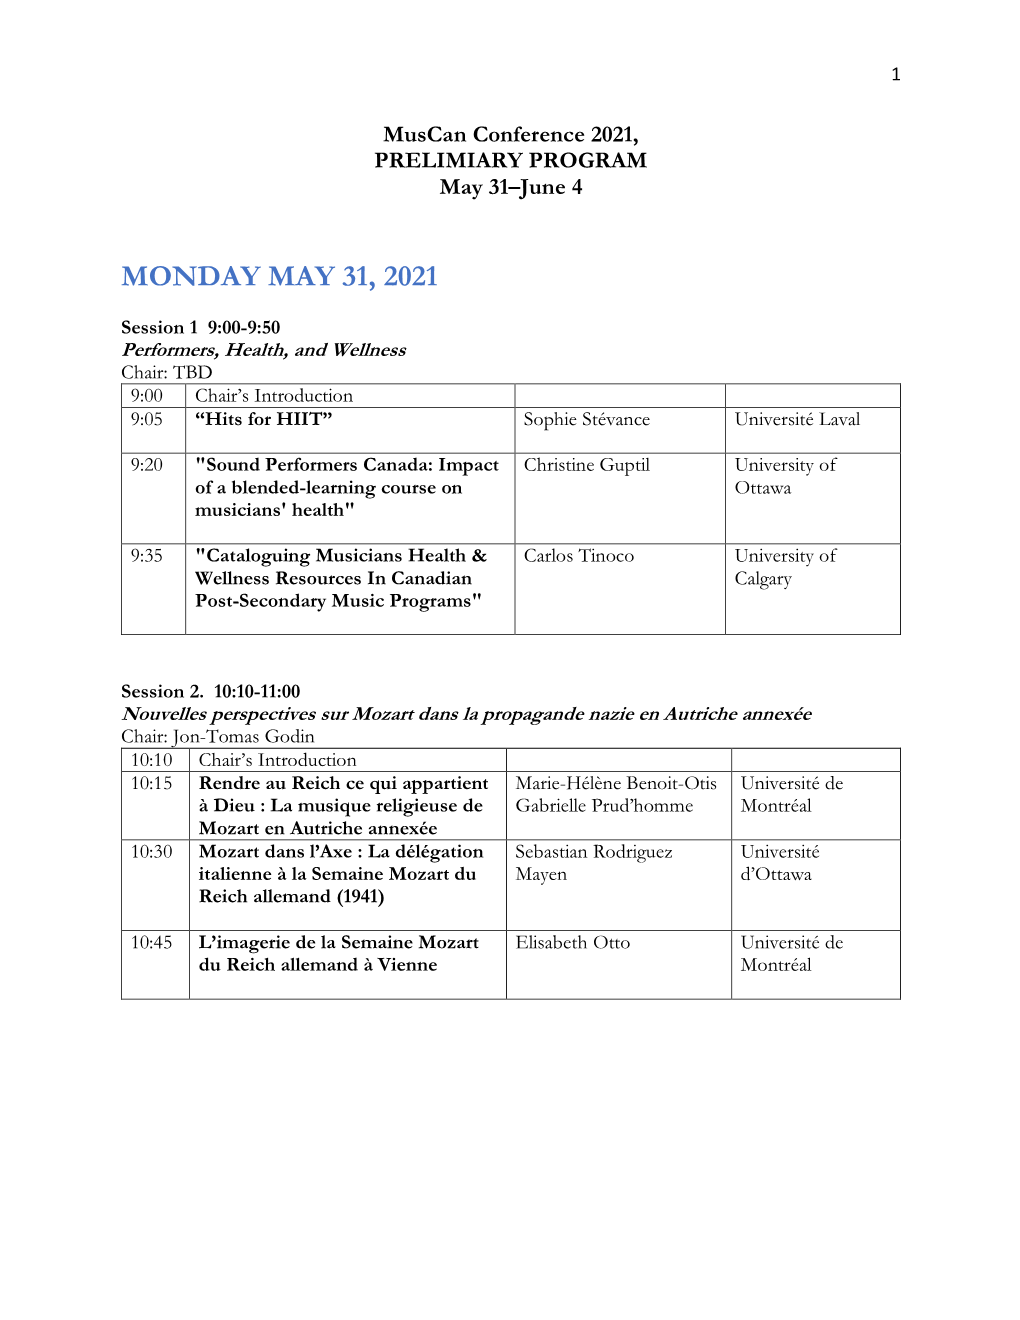 Muscan Conference 2021 Preliminary Program